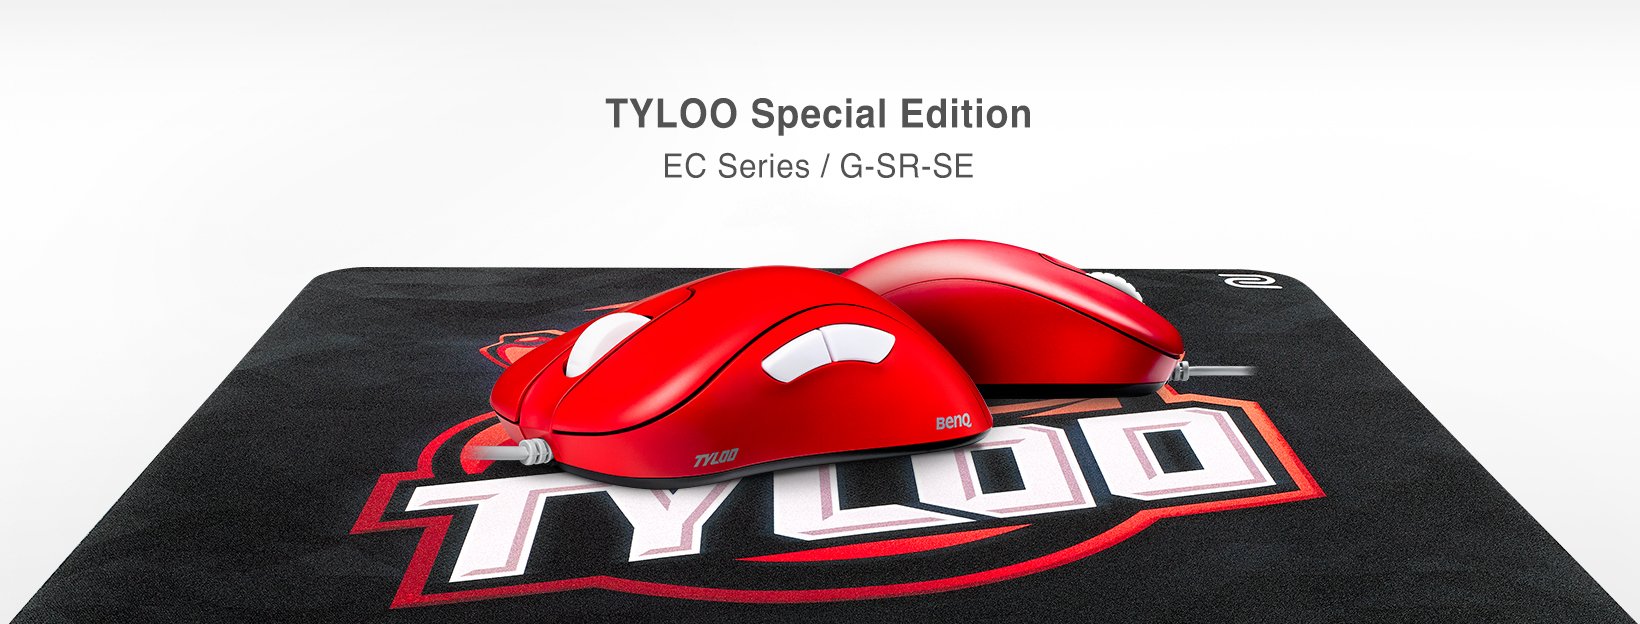 Zowie E Sports North America We Want To Extend Our Appreciation For The Team At Tyloo For Their Love And Commitment To The Game We Are Proud To Announce The Special